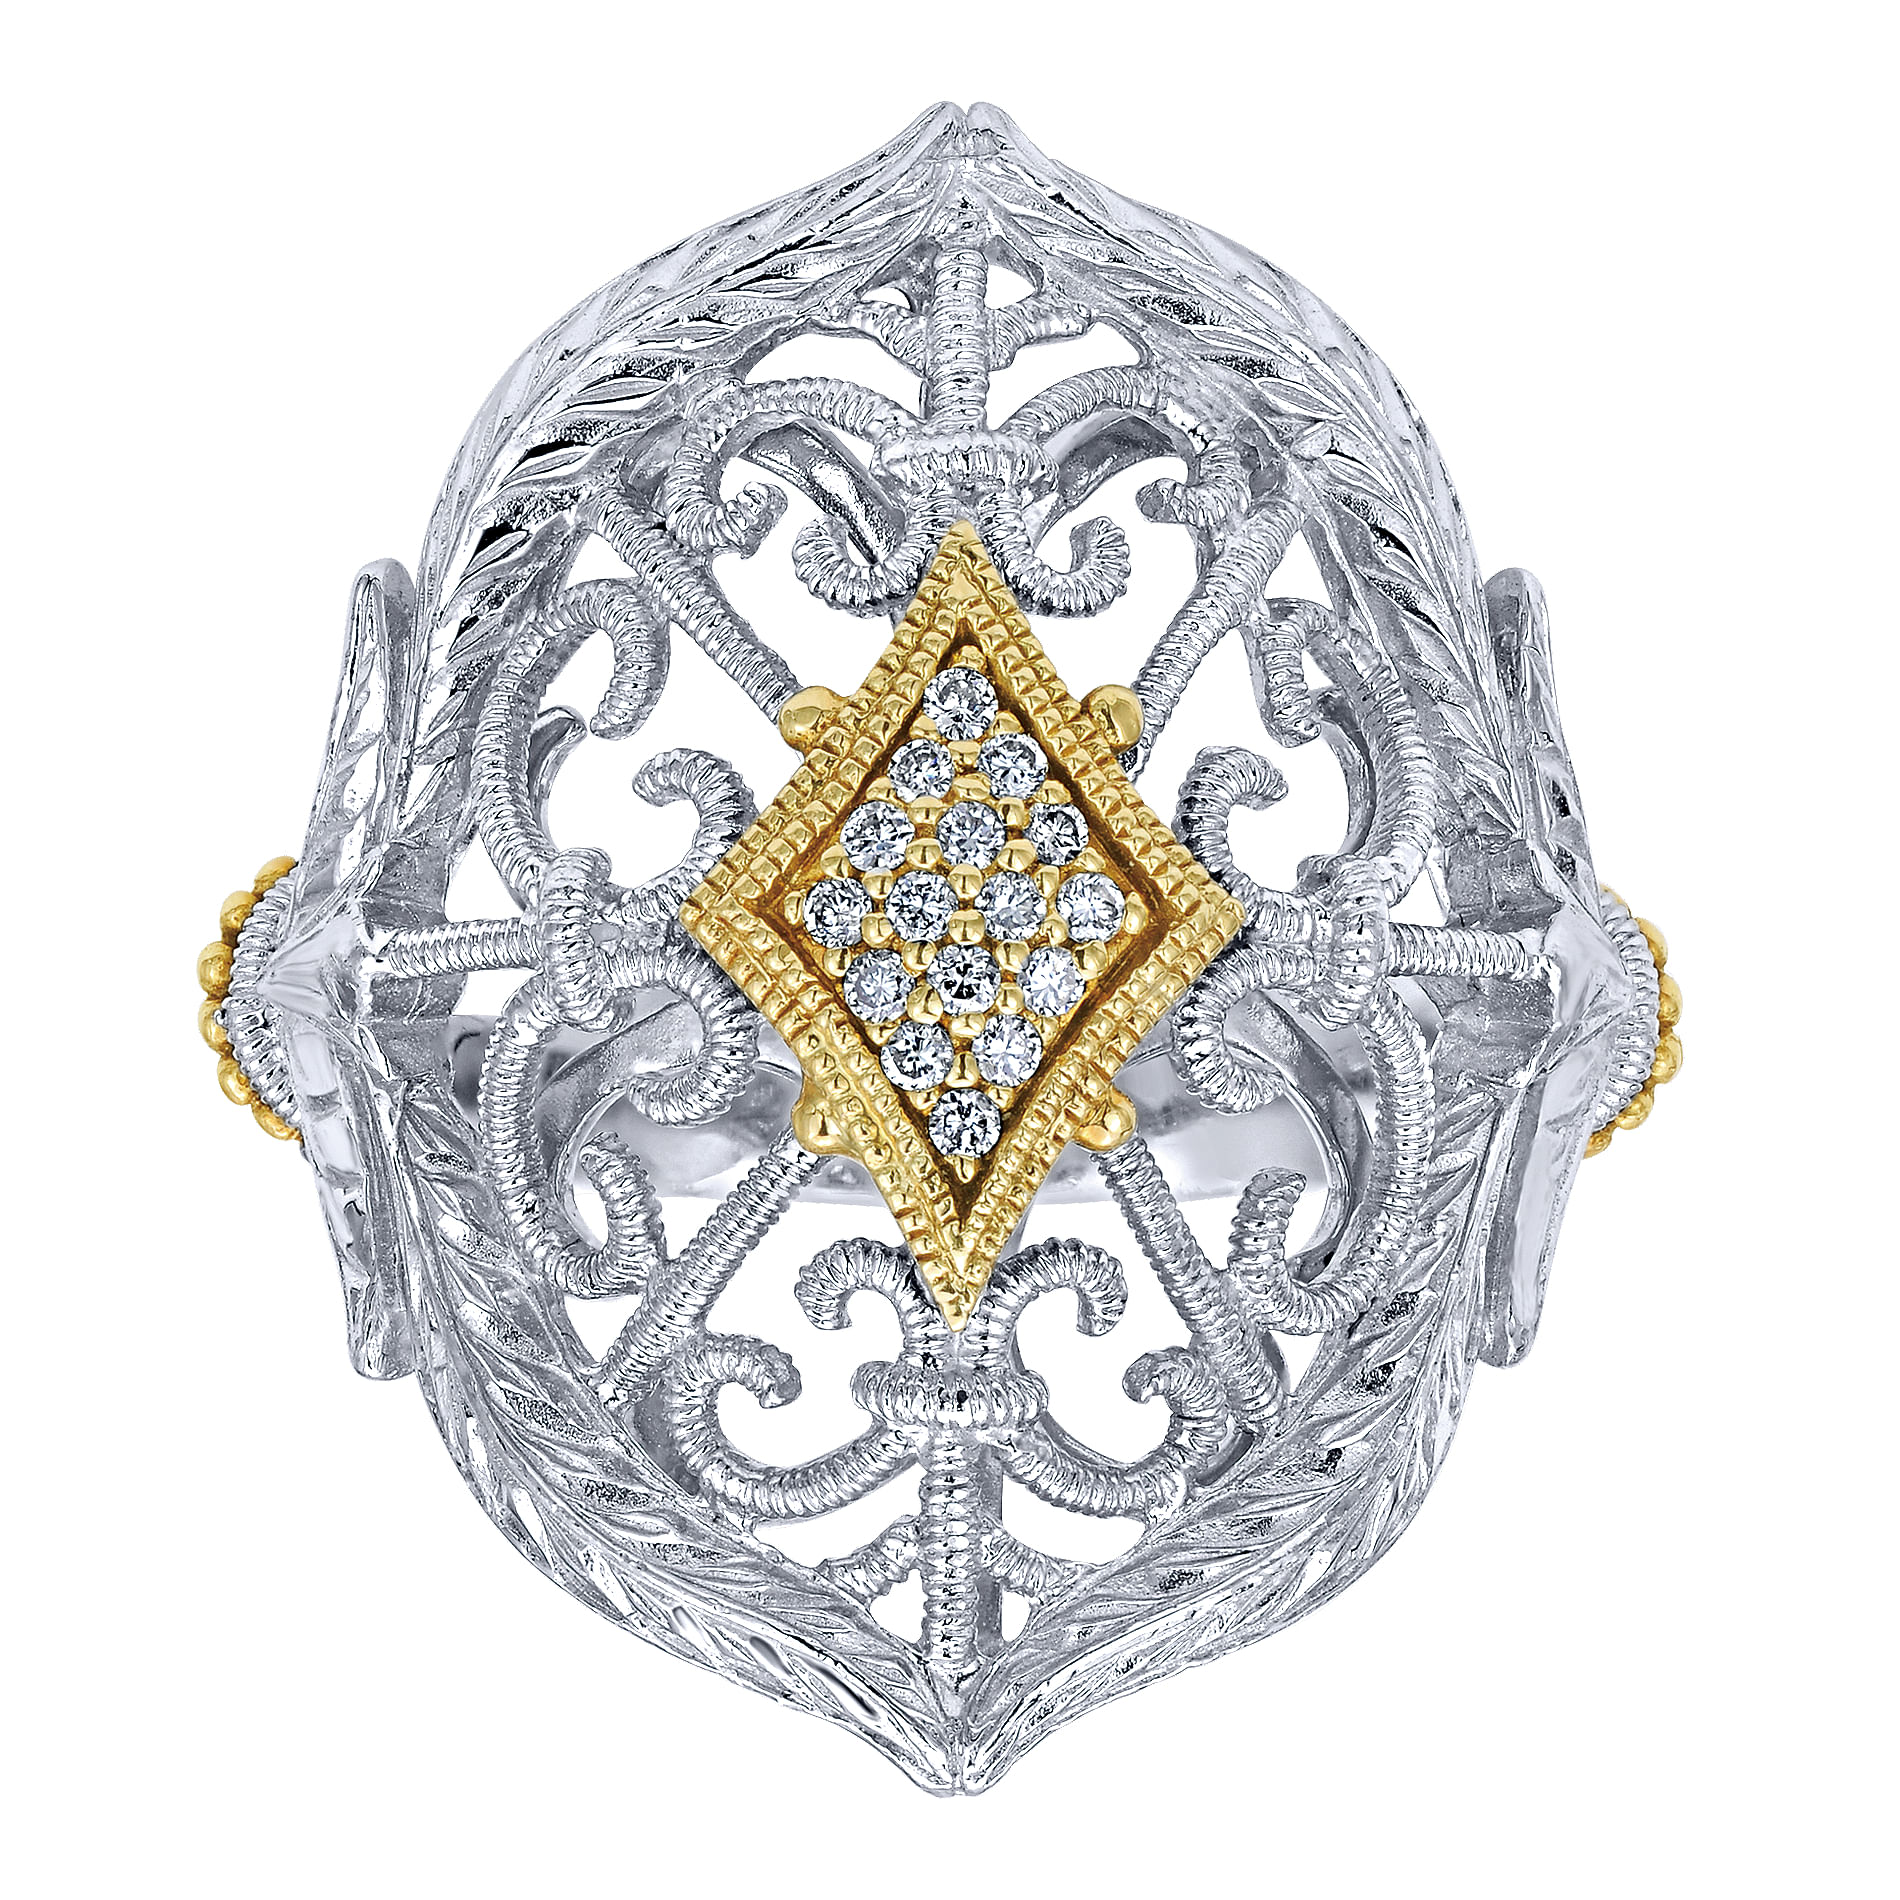 Vintage Inspired 925 Sterling Silver and 18K Yellow Gold Diamond Filigree Ring